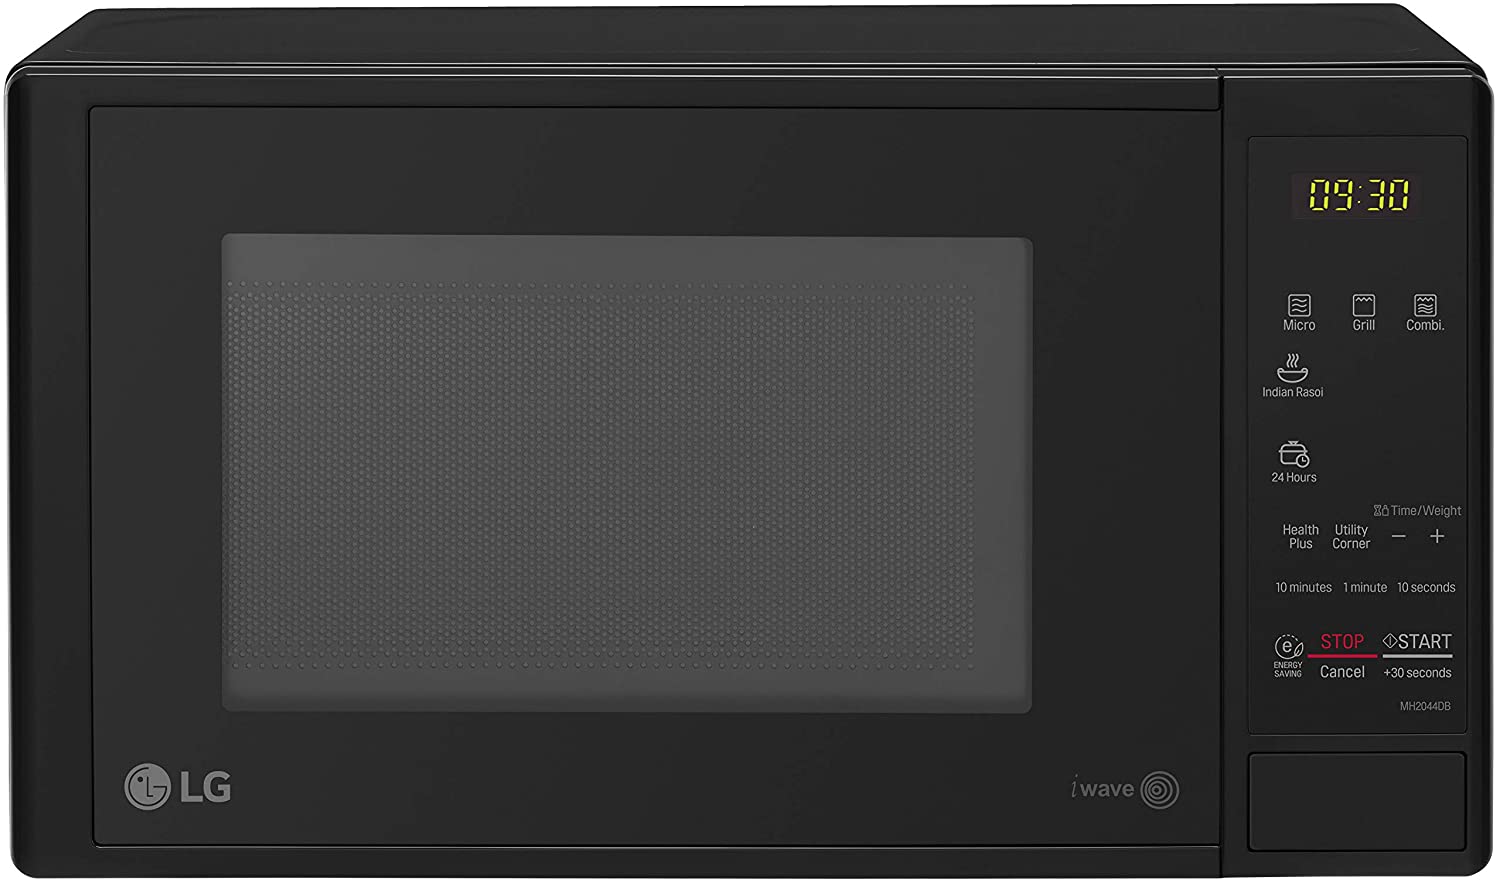 lg grill microwave oven